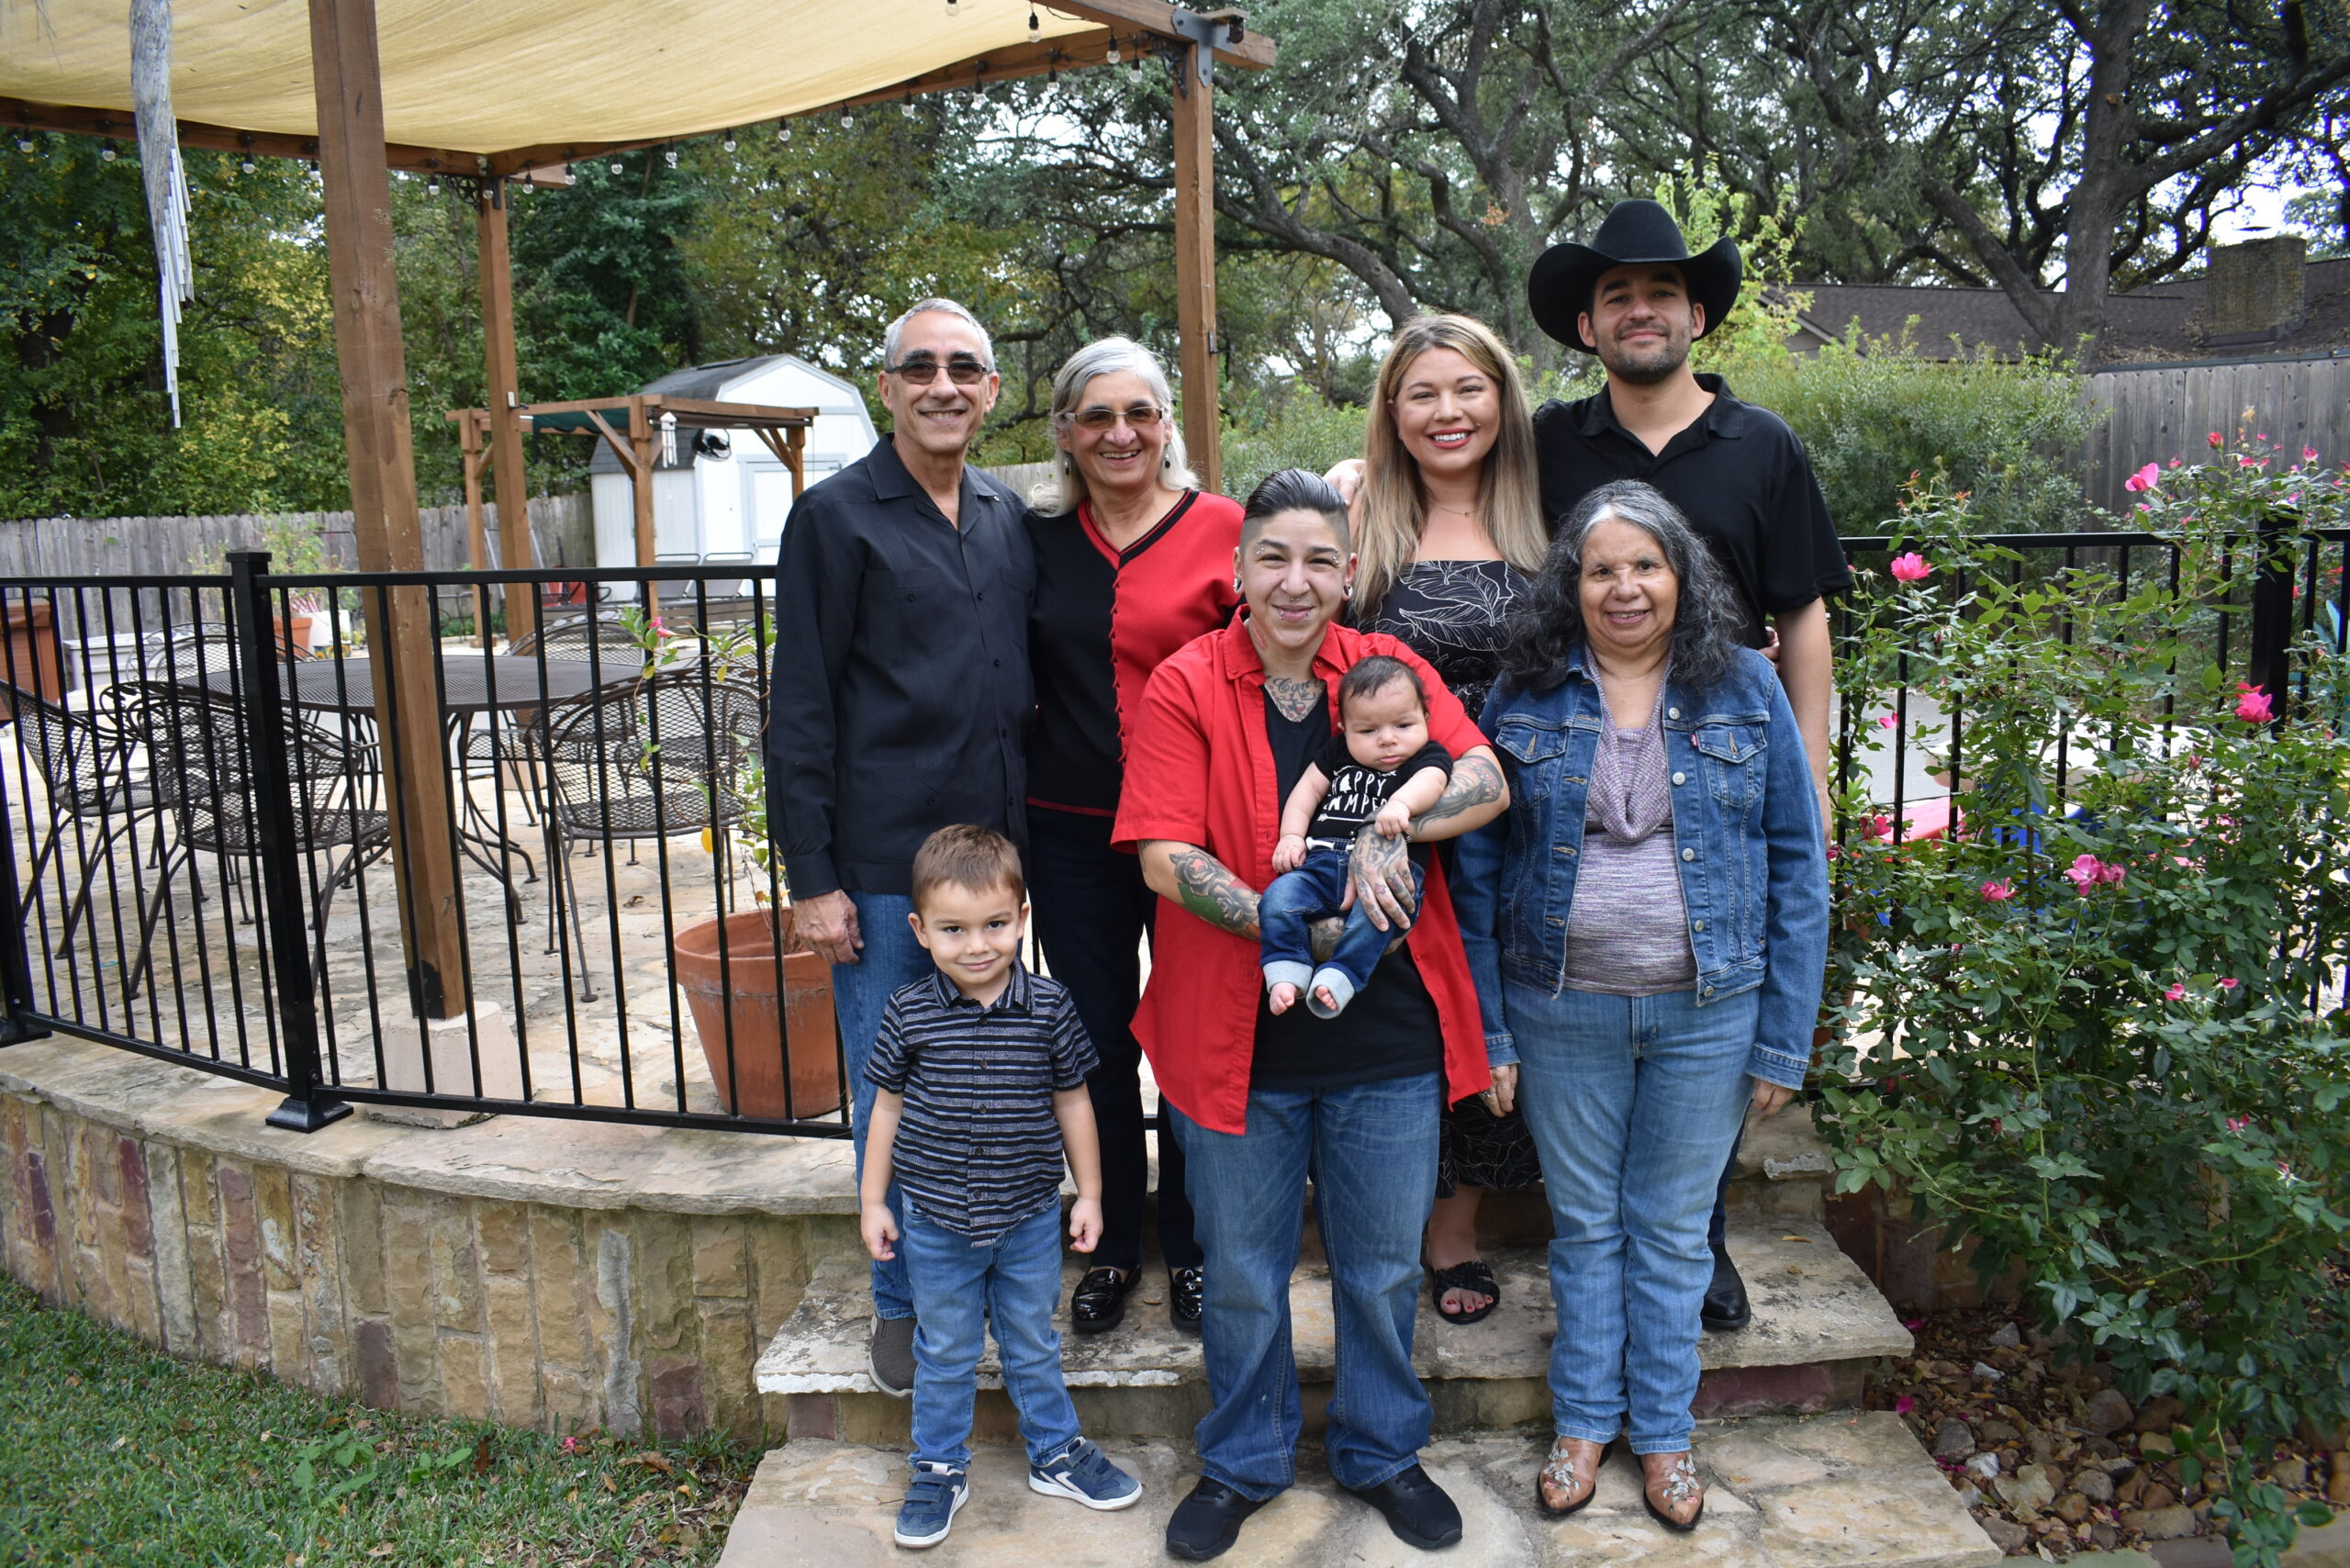 The de la Teja family in our backyard. Top row. left to right: Frank and Maggie, London and Eduardo; second row, left to right: Cru, Julia, Kai, and Maggie's sister Dora.